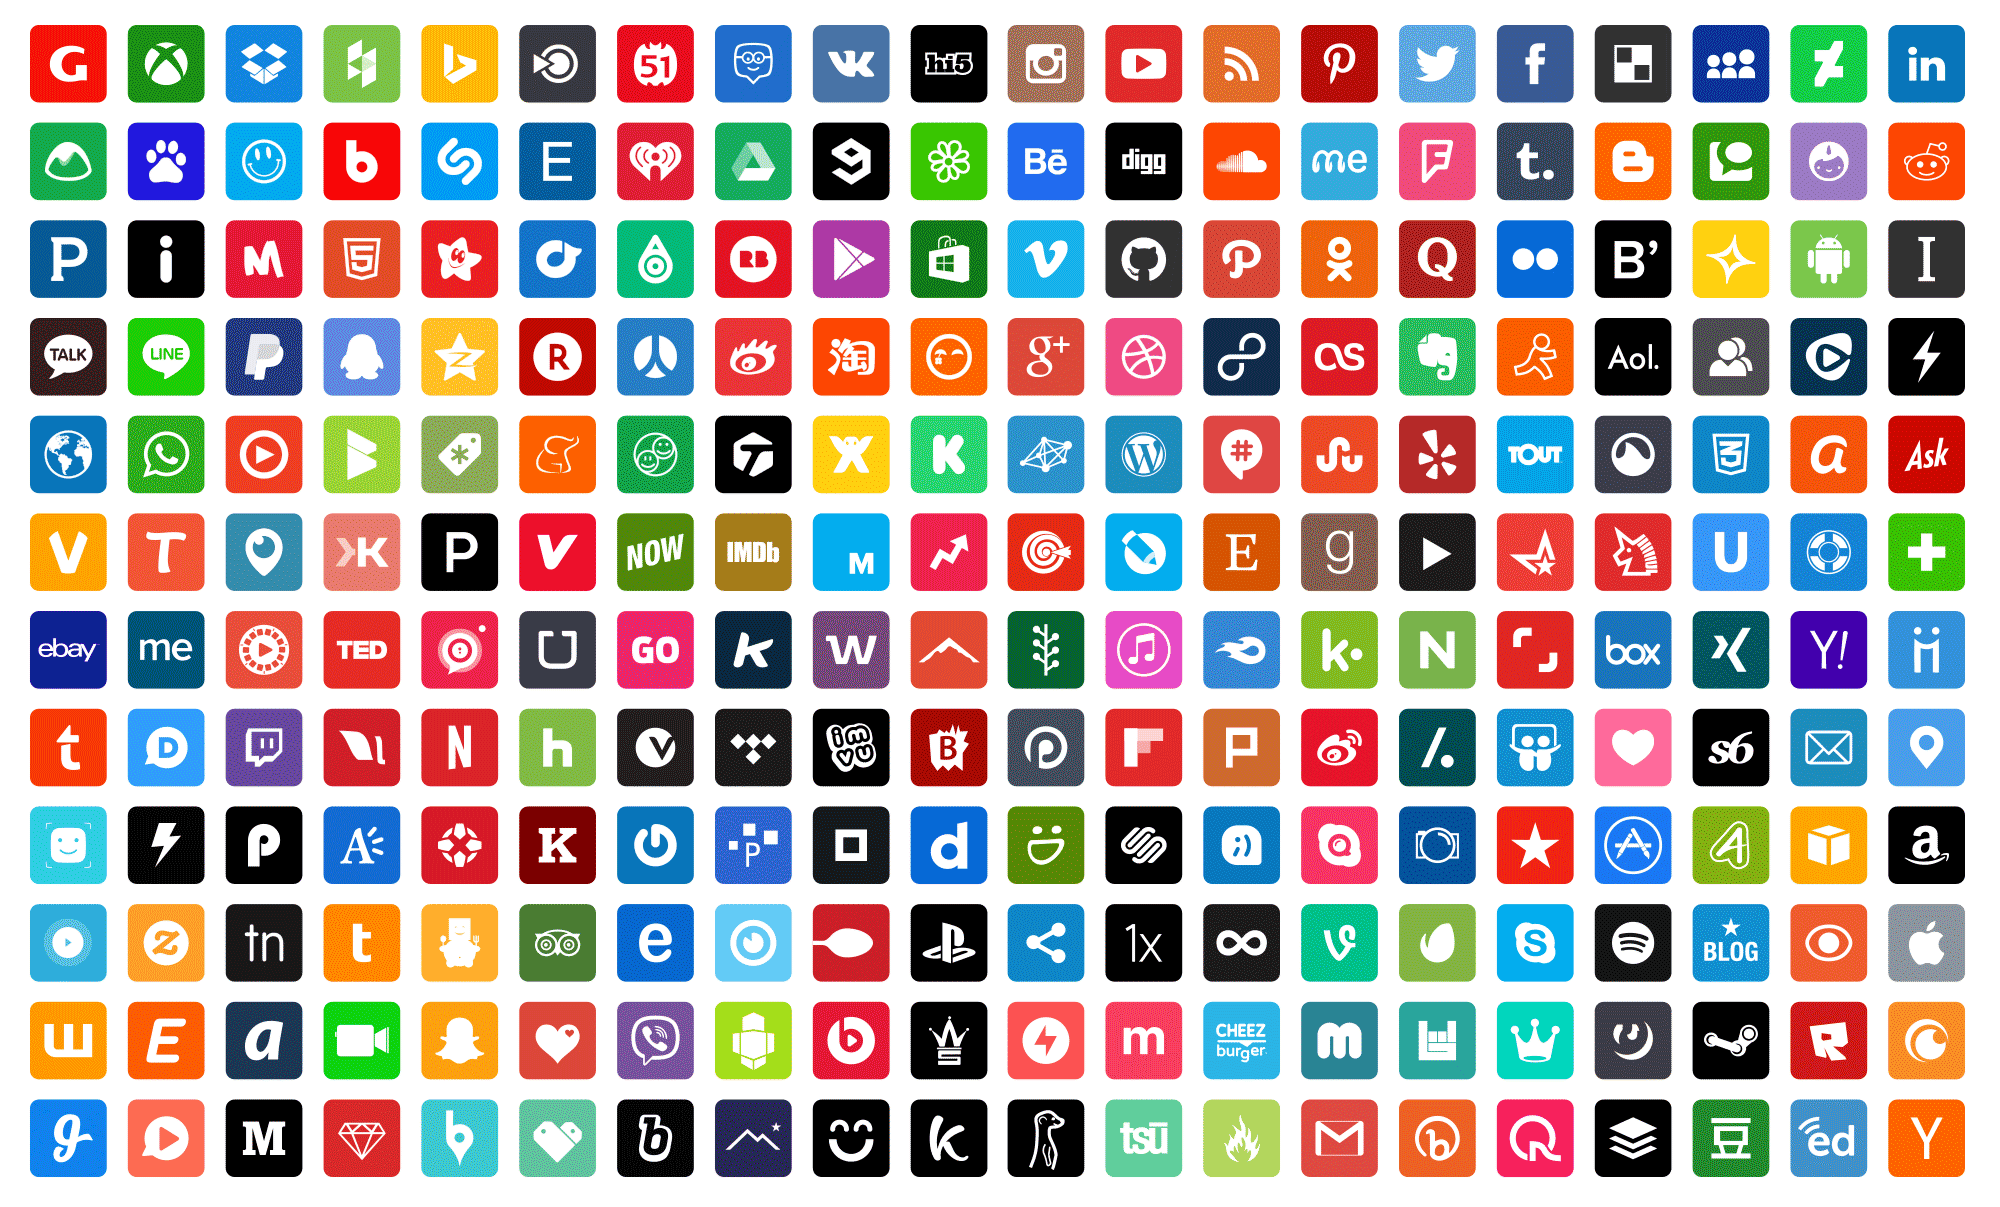 Pattern in a Social Media Logo - How to manage a mass of social media accounts - CF24.7 Blog